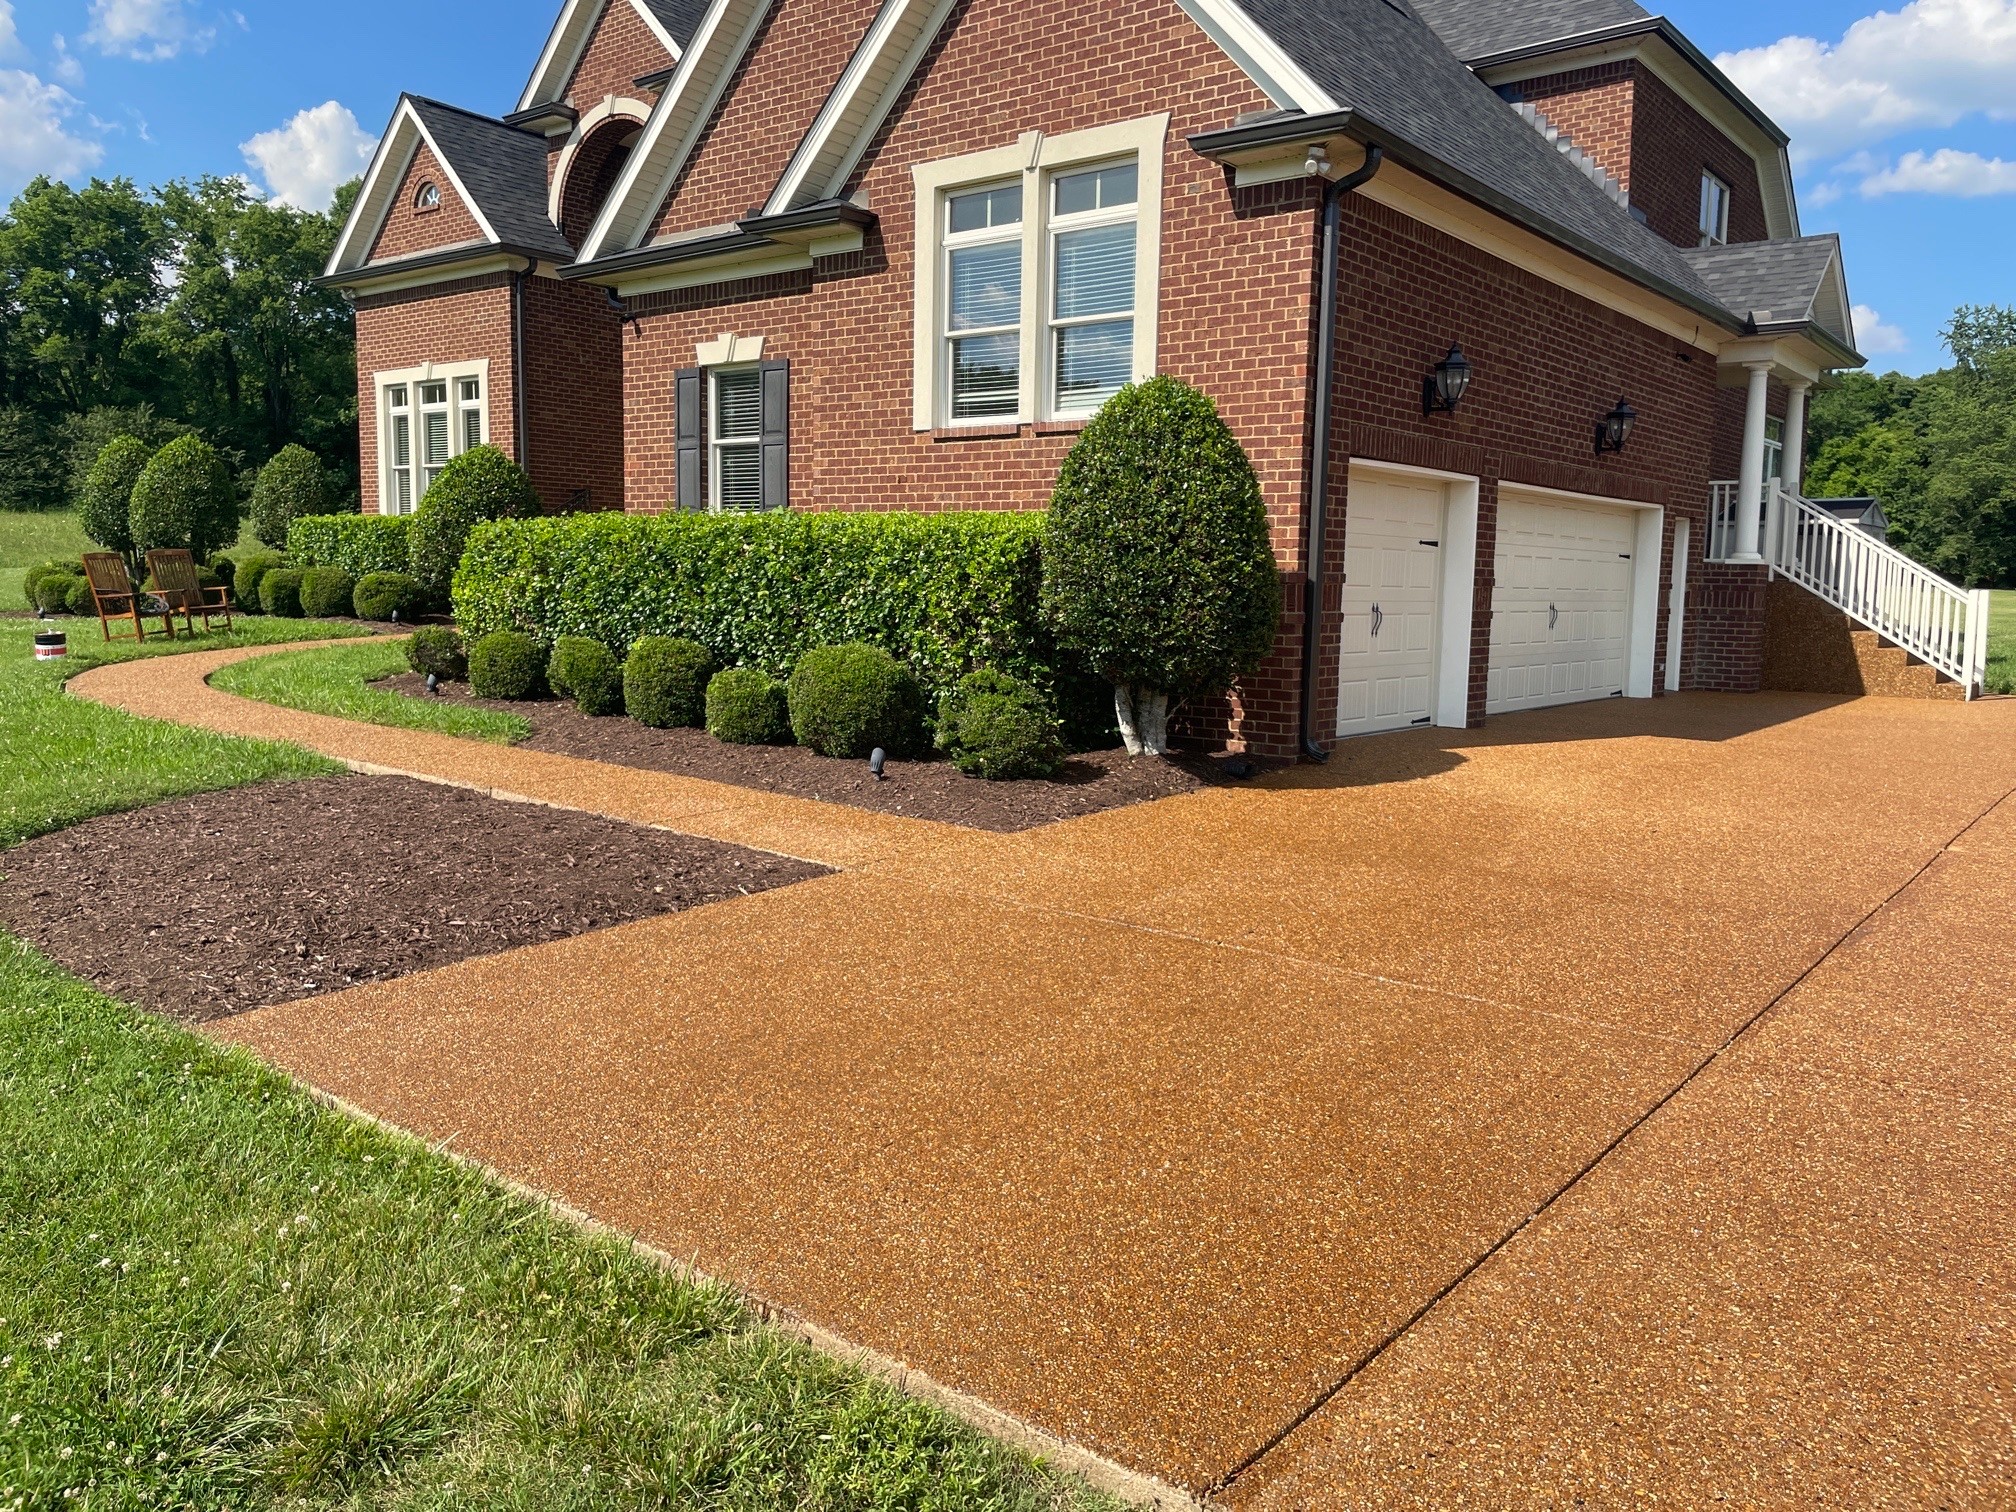 Aggregate Cleaning & Sealing  for Oakland Power Washing in Clarksville, TN